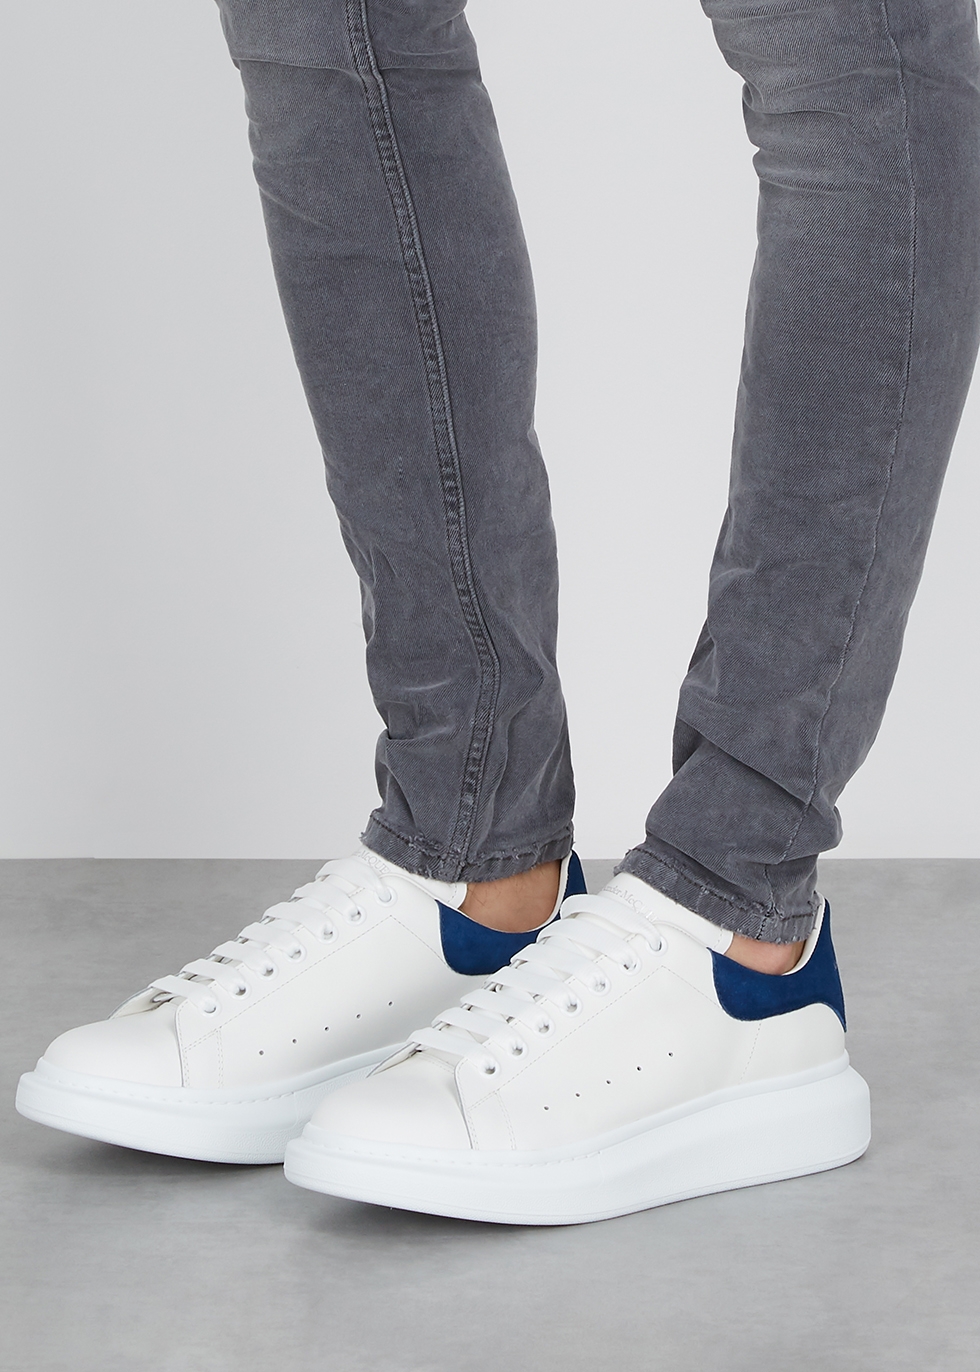 alexander mcqueen white leather sneakers